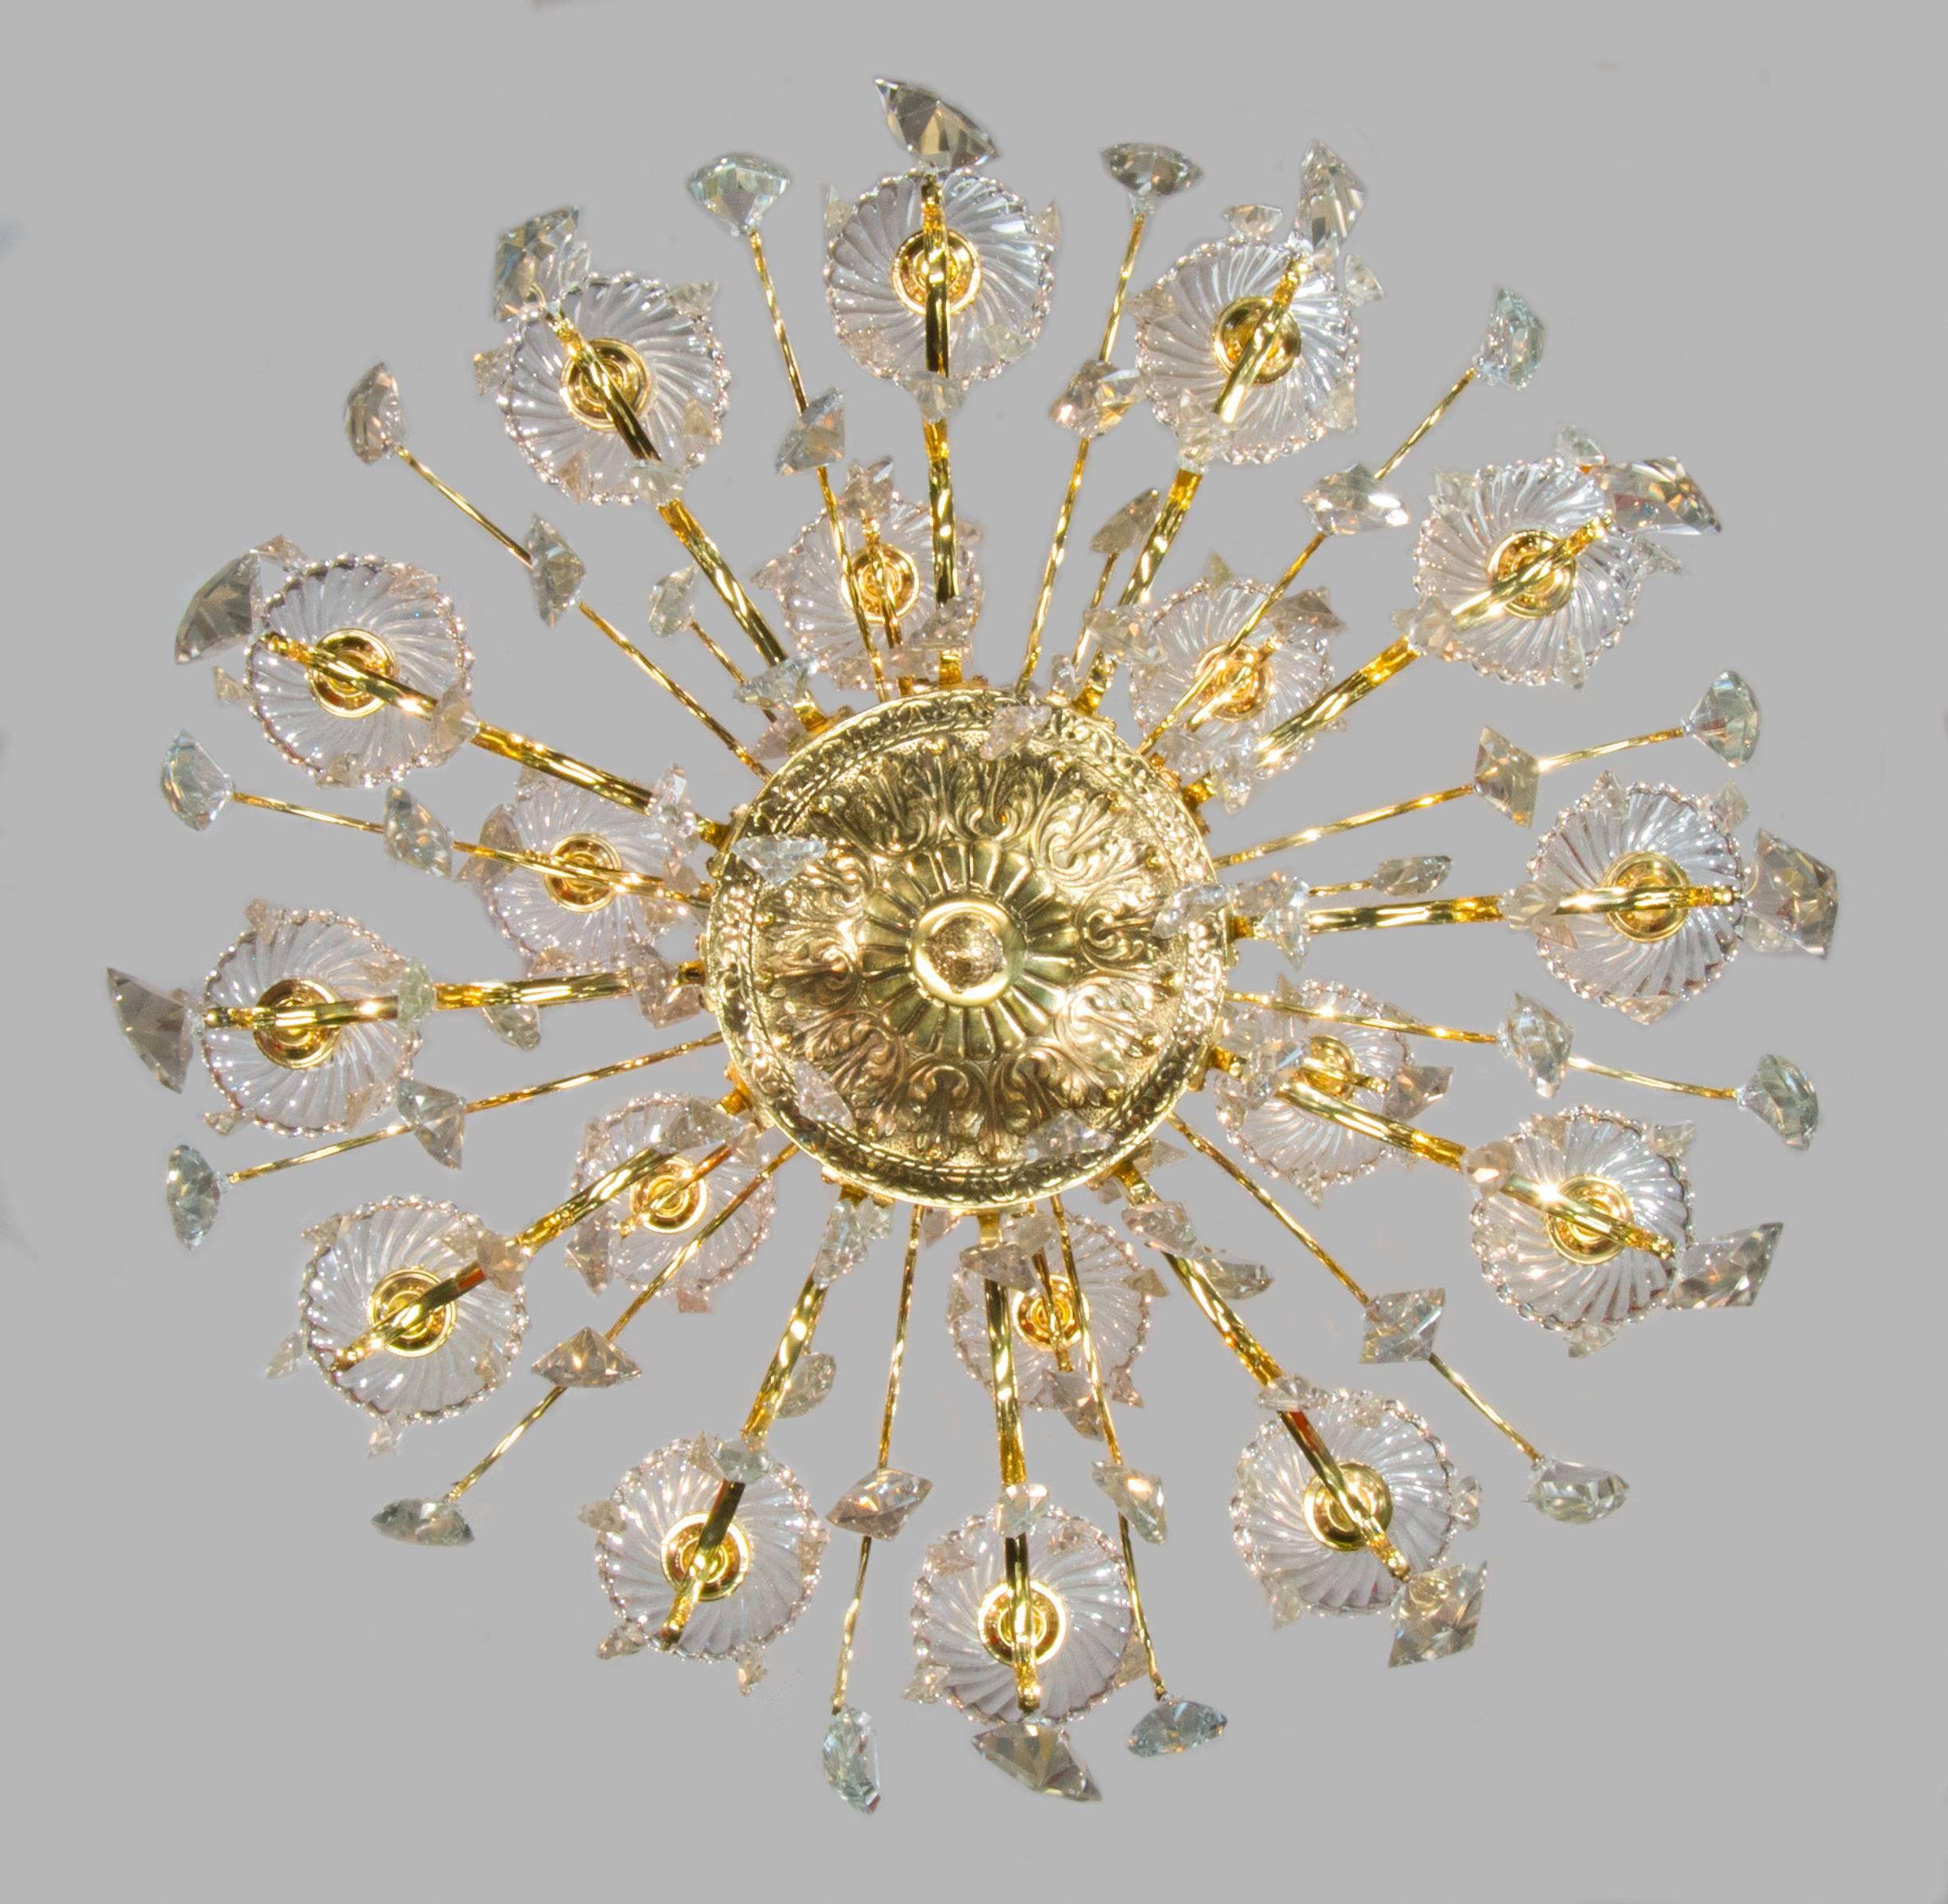 Baroque Large Cut Crystal Eighteen-Branch Early 20th Century Spanish Chandelier For Sale